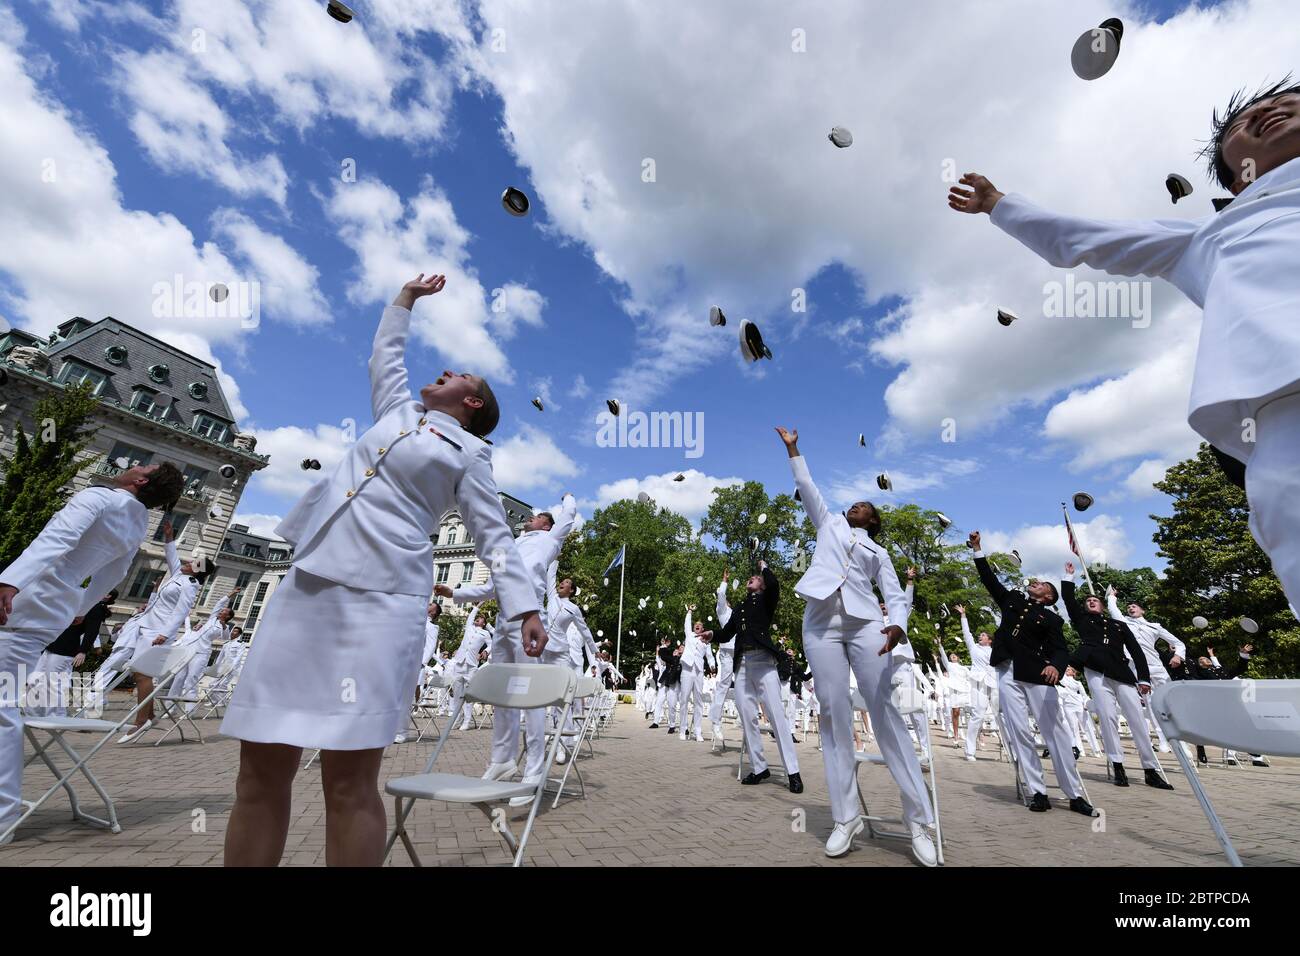 U.S. Naval Academy midshipmen toss their hats into the air at the conclusion of the commencement and commissioning ceremony for the Naval Academy Class of 2020 under COVID-19, coronavirus pandemic social distancing rules May 16, 2020 in Annapolis, Maryland. Approximately 1,000 midshipmen will graduate and be sworn-in during five events and one virtual ceremony. Stock Photo